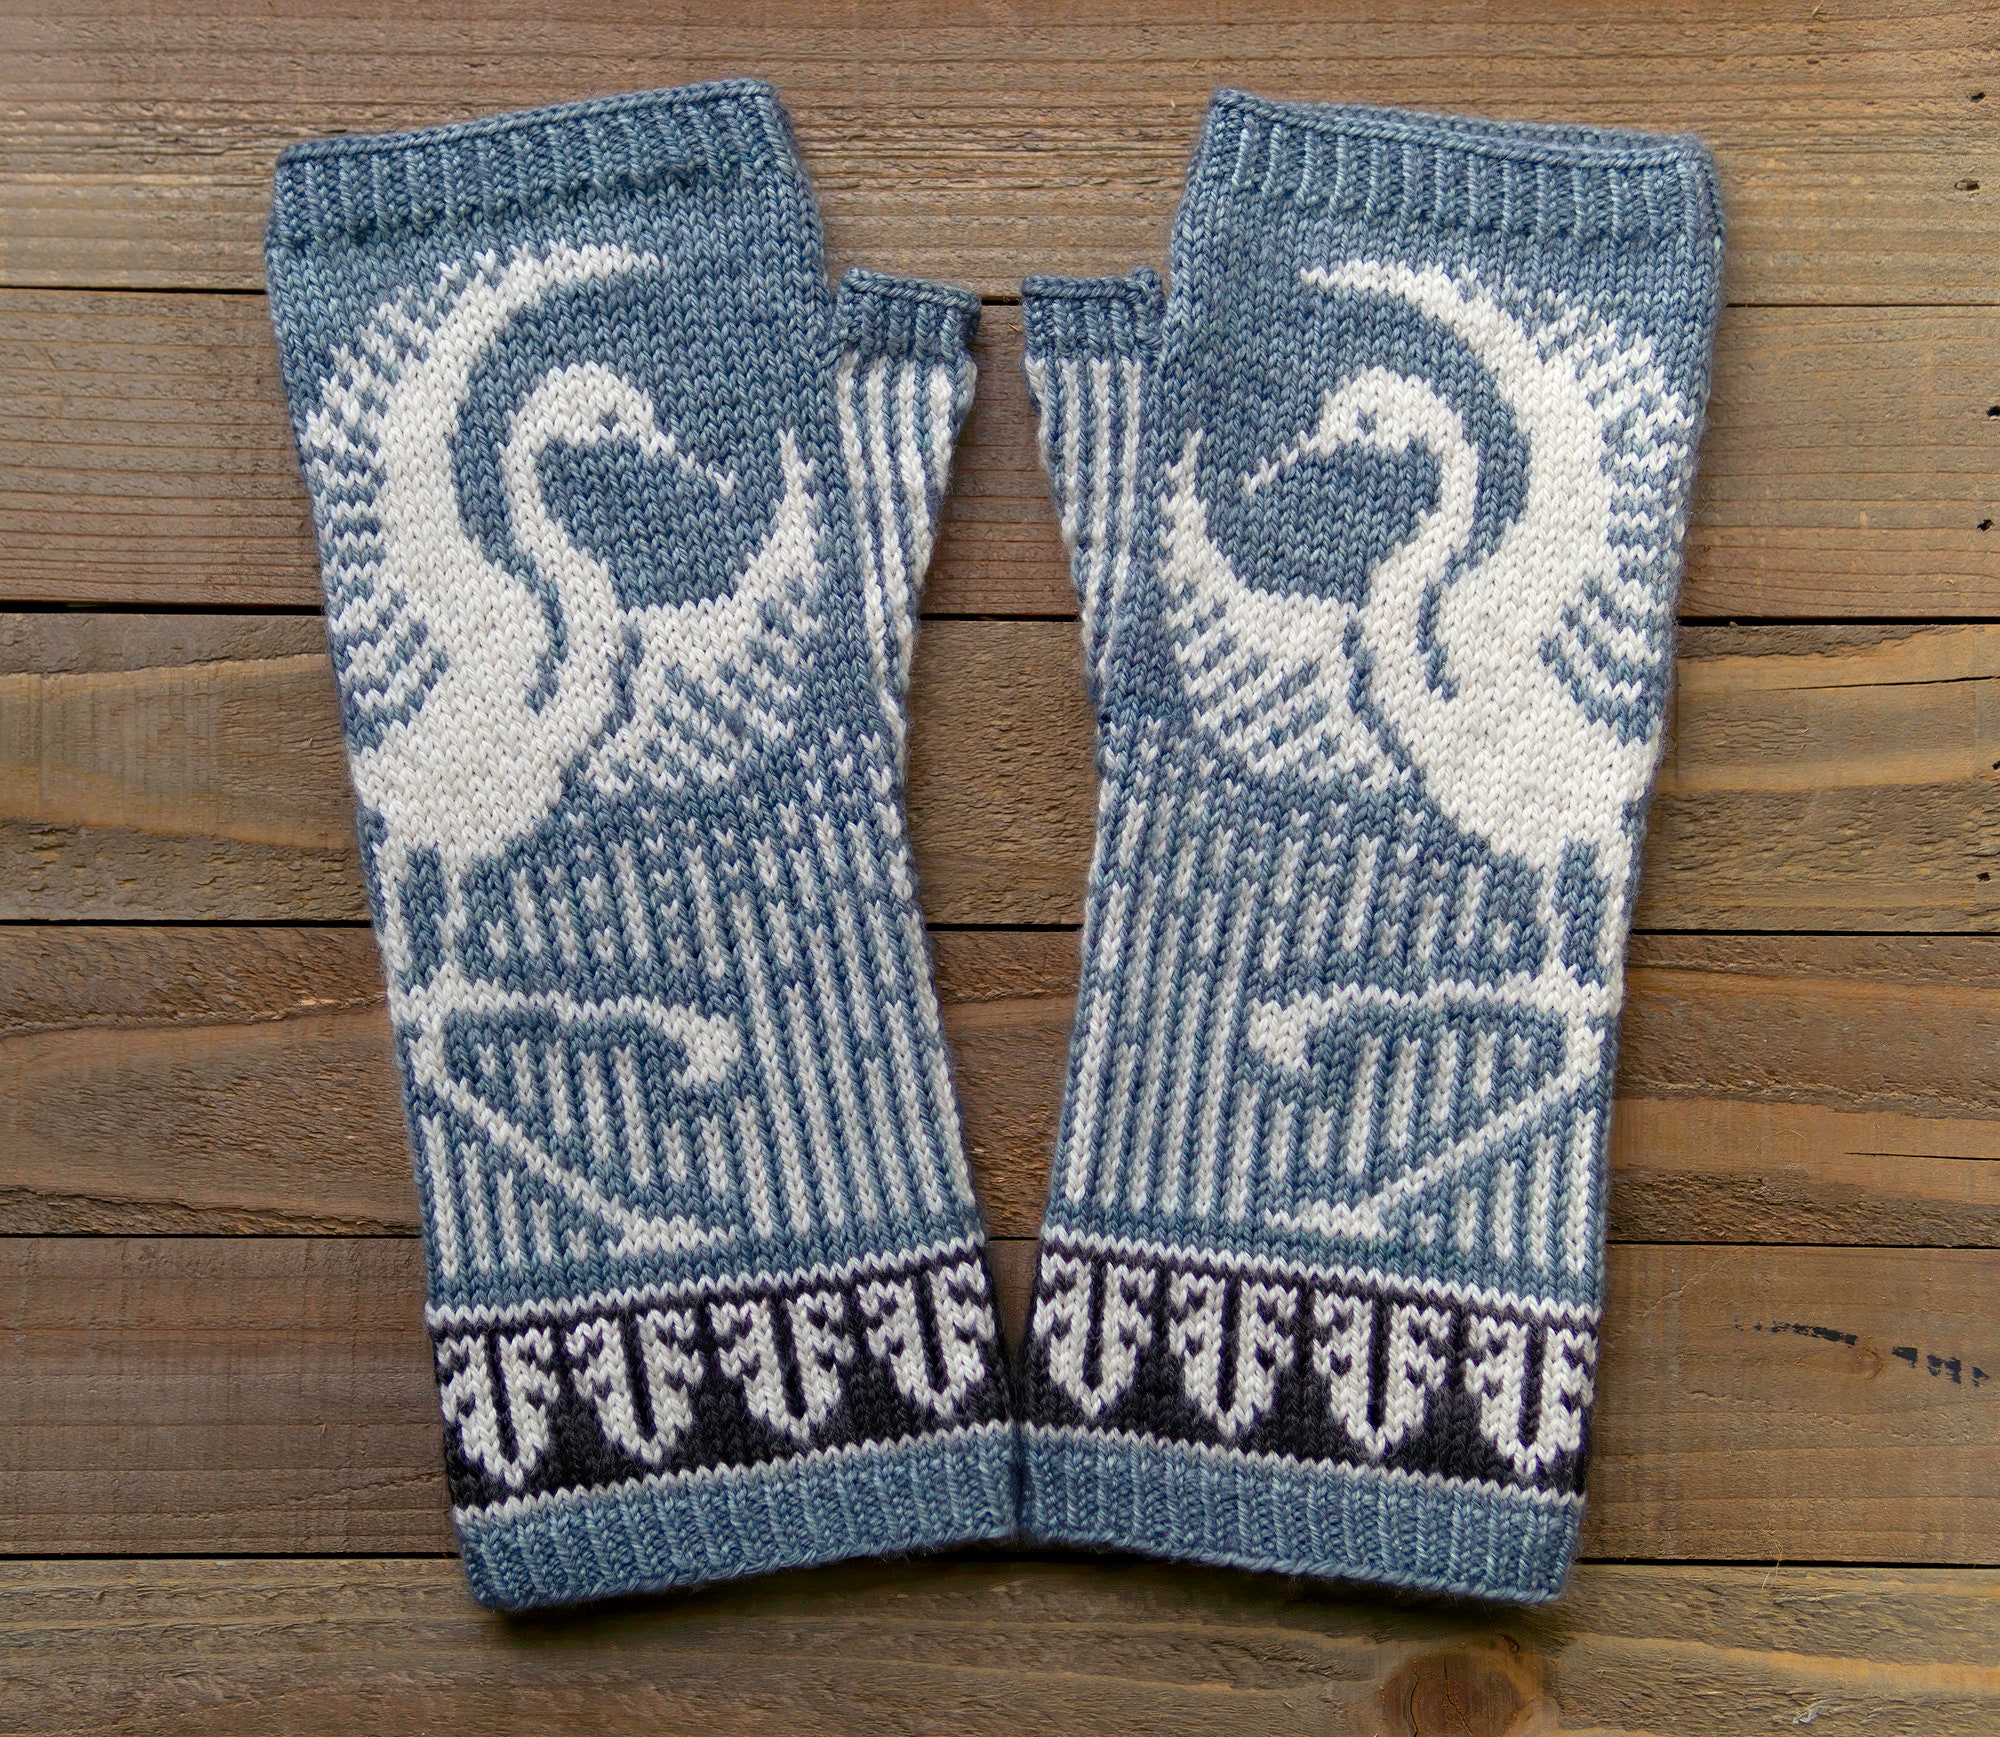 Magpie fingerless gloves (first self-invented pattern) : r/knitting